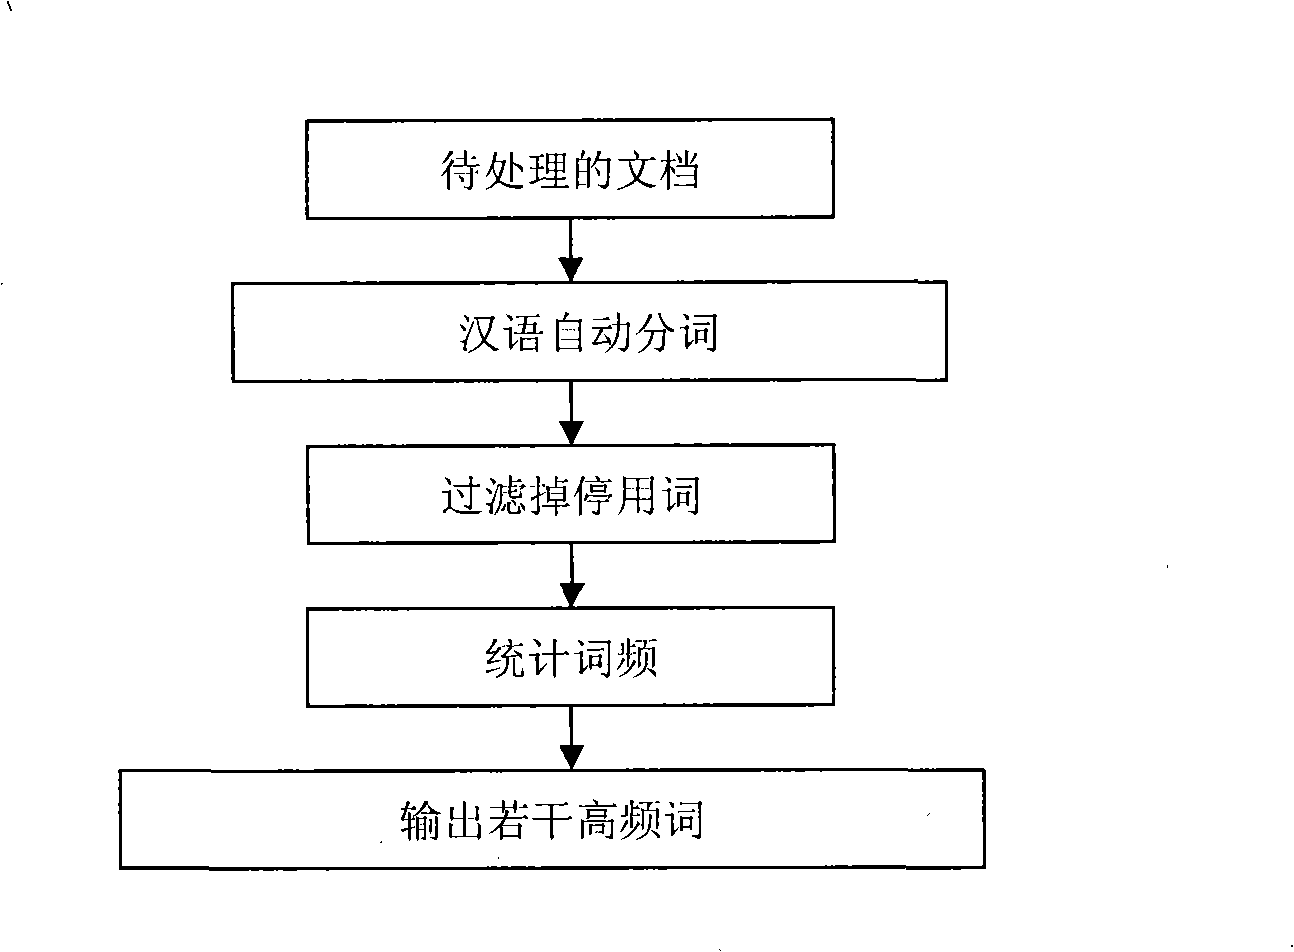 Method for rapidly clustering documents